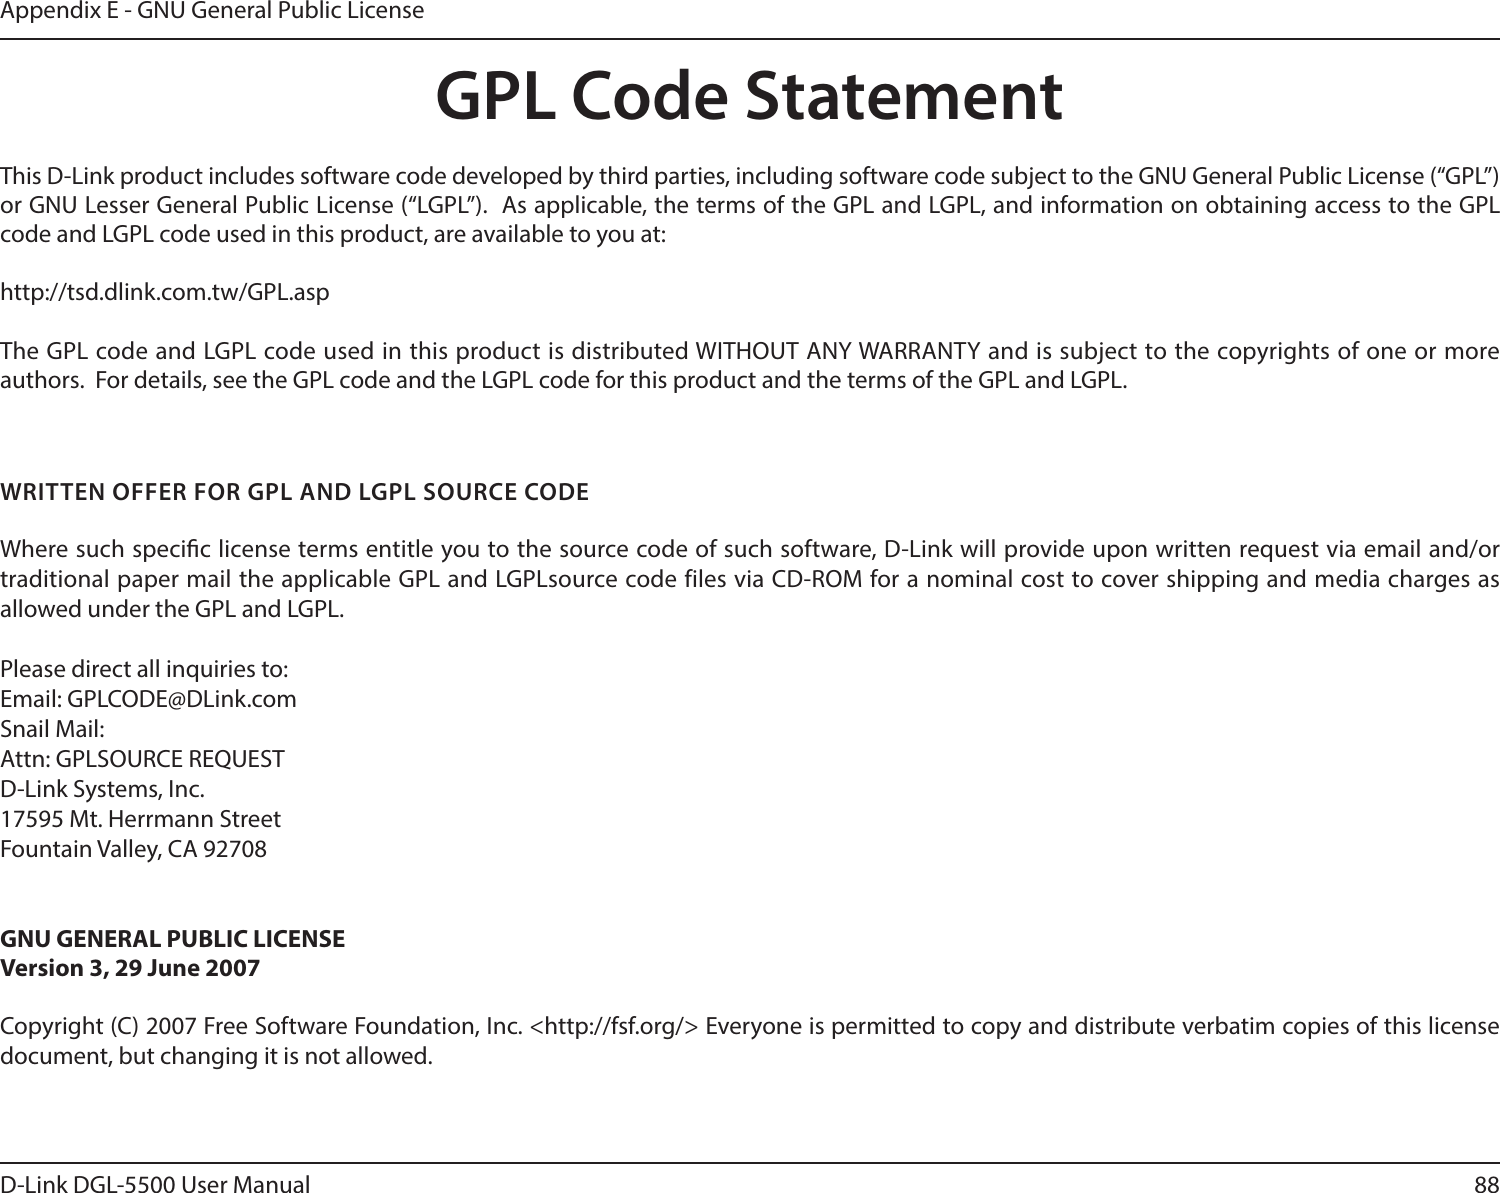 88D-Link DGL-5500 User ManualAppendix E - GNU General Public LicenseGPL Code StatementThis D-Link product includes software code developed by third parties, including software code subject to the GNU General Public License (“GPL”) or GNU Lesser General Public License (“LGPL”).  As applicable, the terms of the GPL and LGPL, and information on obtaining access to the GPL code and LGPL code used in this product, are available to you at:http://tsd.dlink.com.tw/GPL.aspThe GPL code and LGPL code used in this product is distributed WITHOUT ANY WARRANTY and is subject to the copyrights of one or more authors.  For details, see the GPL code and the LGPL code for this product and the terms of the GPL and LGPL.WRITTEN OFFER FOR GPL AND LGPL SOURCE CODEWhere such specic license terms entitle you to the source code of such software, D-Link will provide upon written request via email and/or traditional paper mail the applicable GPL and LGPLsource code files via CD-ROM for a nominal cost to cover shipping and media charges as allowed under the GPL and LGPL.  Please direct all inquiries to:Email: GPLCODE@DLink.comSnail Mail:Attn: GPLSOURCE REQUESTD-Link Systems, Inc.17595 Mt. Herrmann StreetFountain Valley, CA 92708GNU GENERAL PUBLIC LICENSEVersion 3, 29 June 2007Copyright (C) 2007 Free Software Foundation, Inc. &lt;http://fsf.org/&gt; Everyone is permitted to copy and distribute verbatim copies of this license document, but changing it is not allowed.